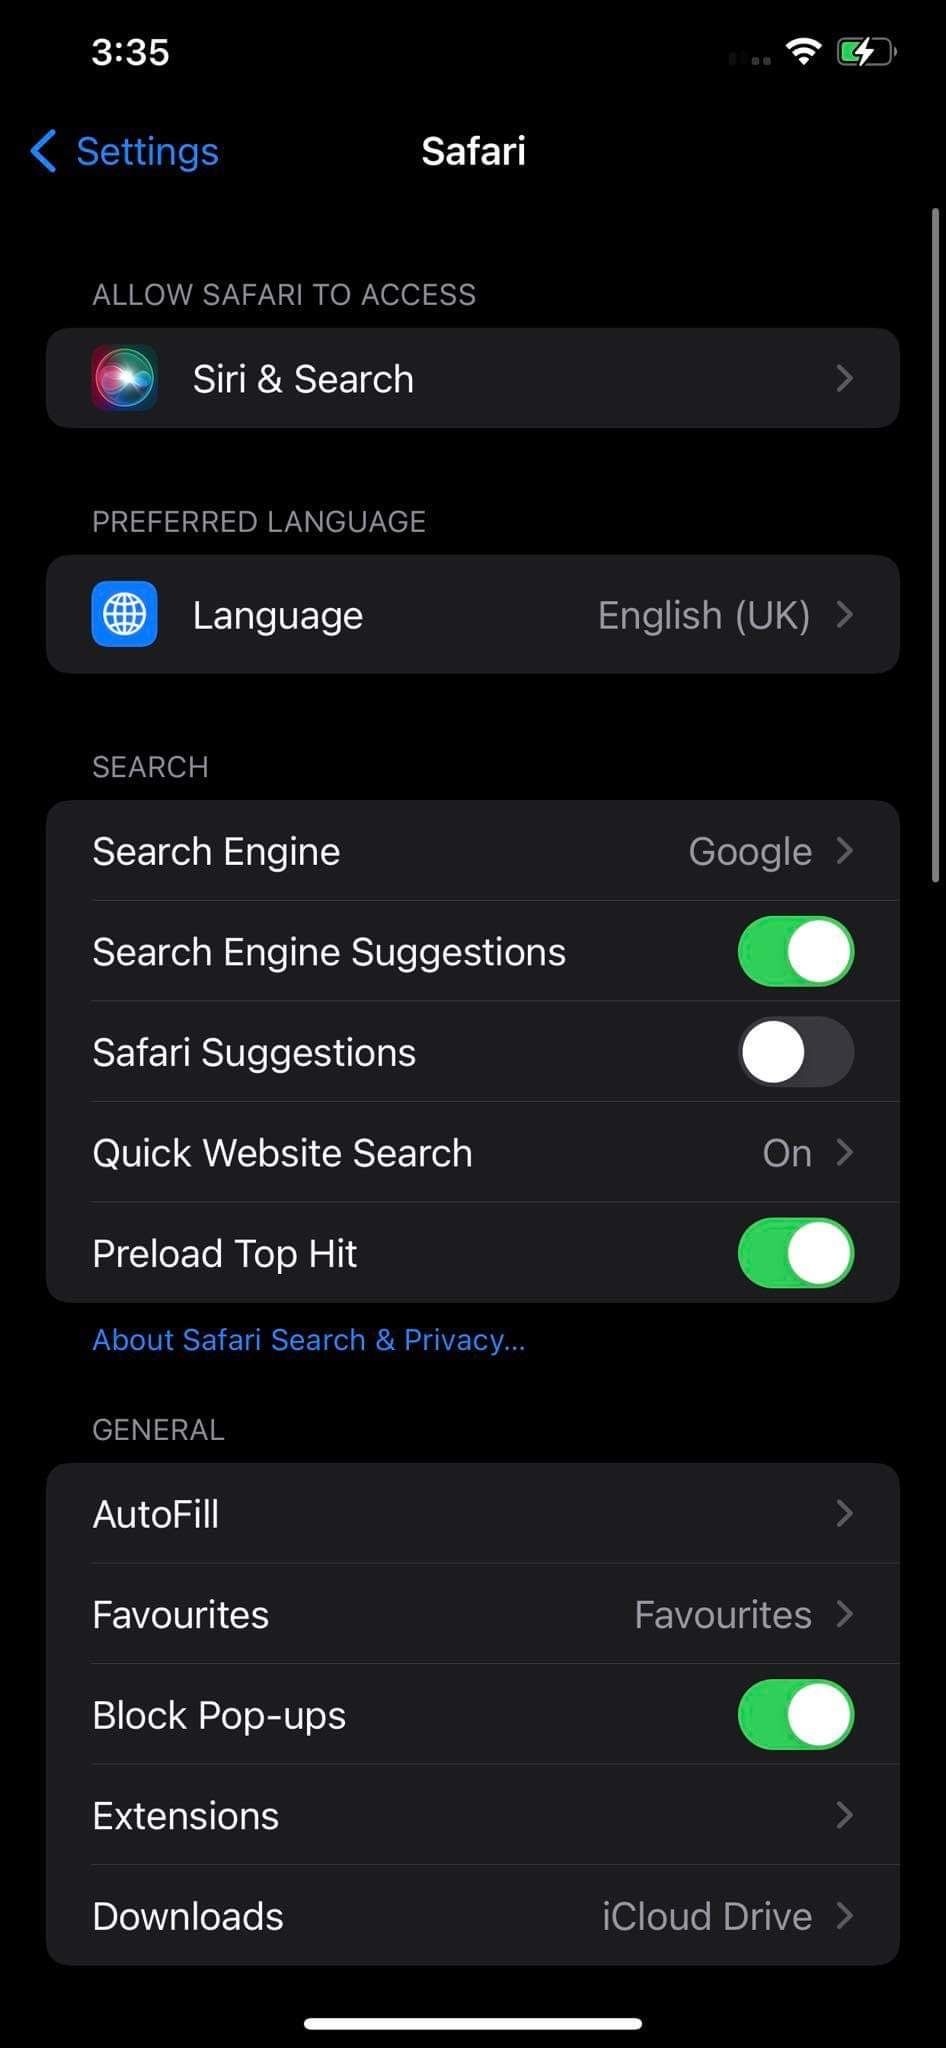 Opening Search Engine Option under Safari Settings in iPhone’s Settings App